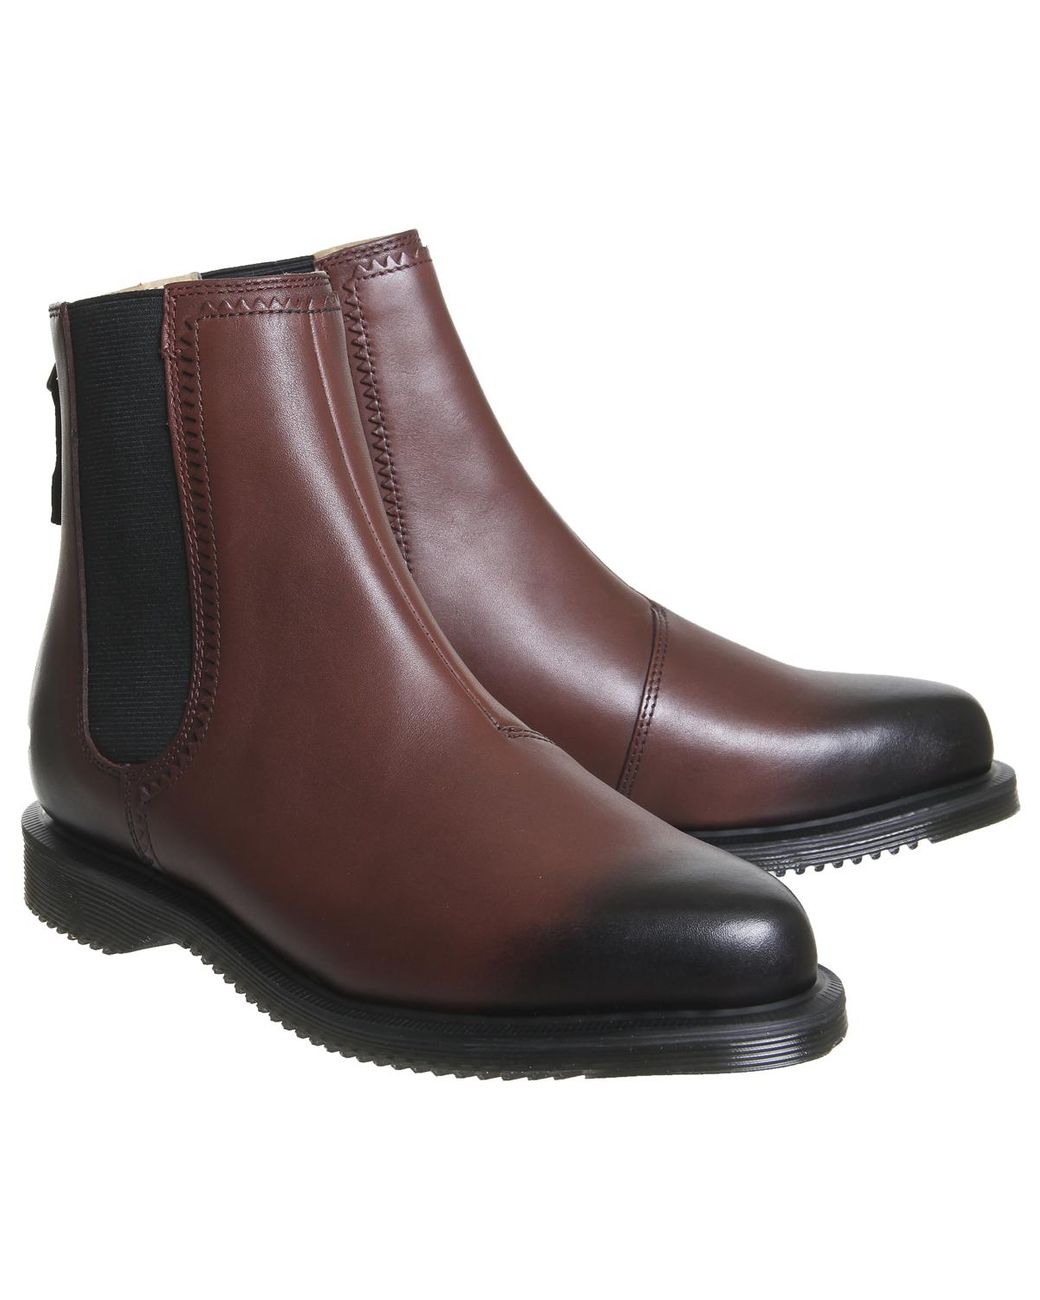 Dr. Martens Leather Zillow Chelsea Boots in Cherry (Brown) | Lyst Canada